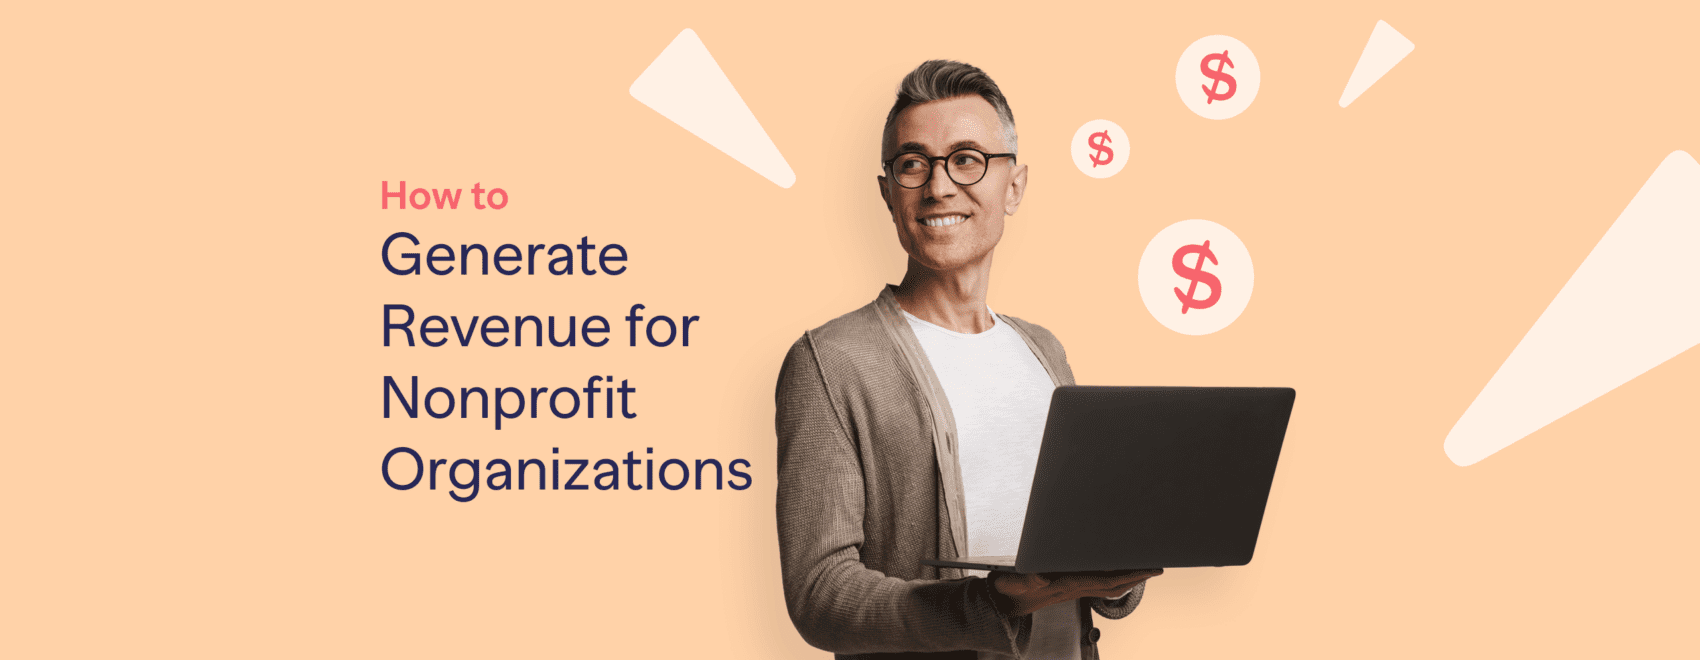 How to Generate Revenue for Nonprofit Organizations